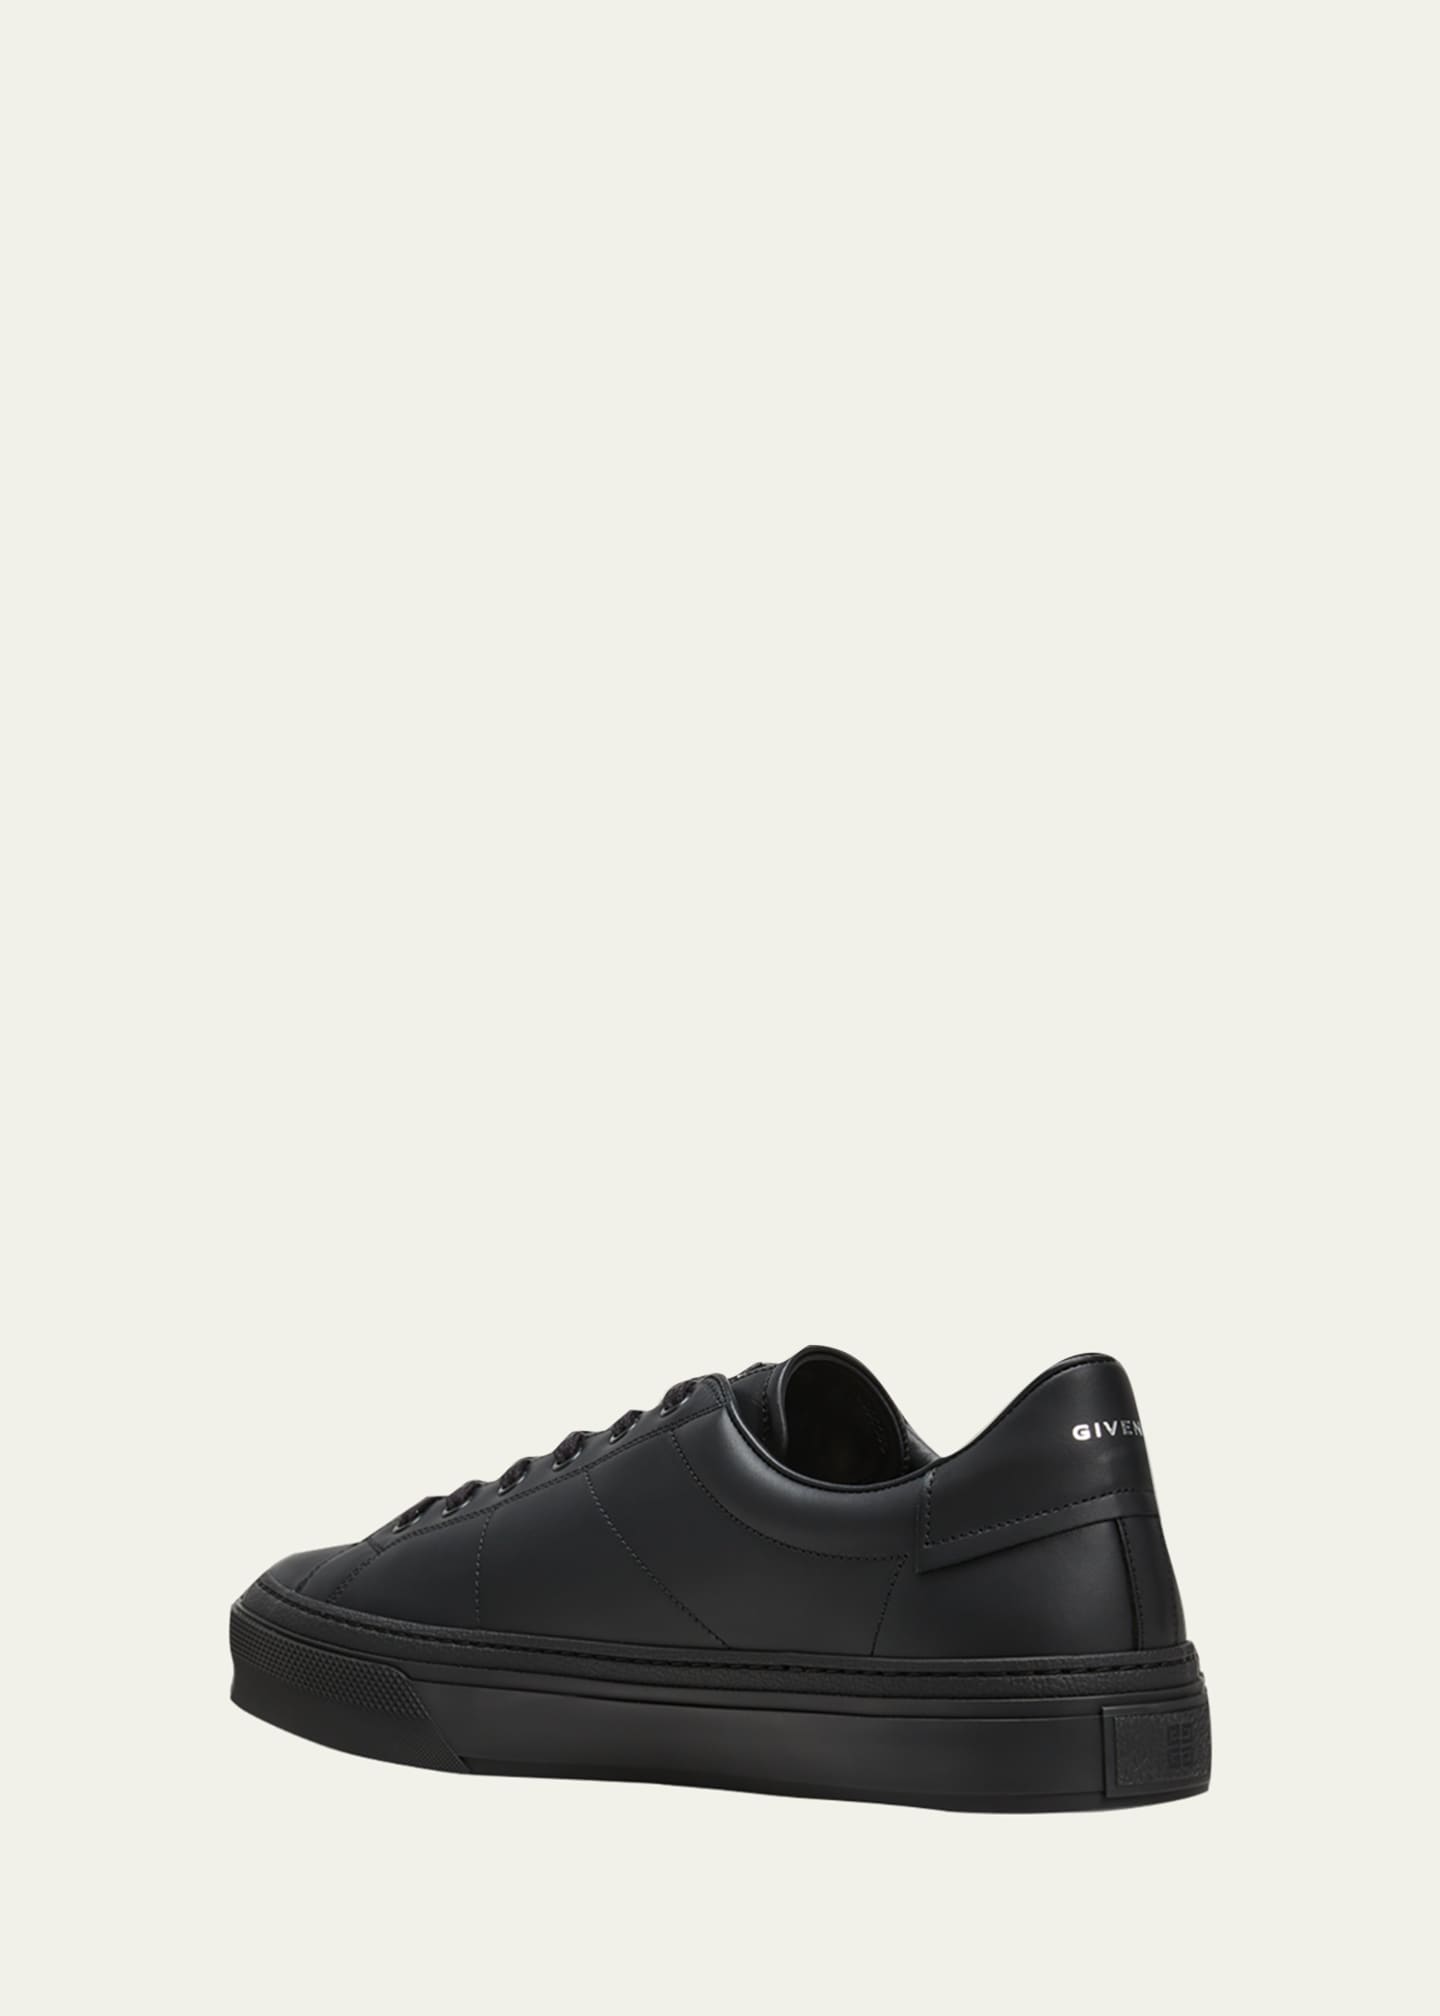 Givenchy Men's City Sport Leather Low-Top Sneakers - Bergdorf Goodman